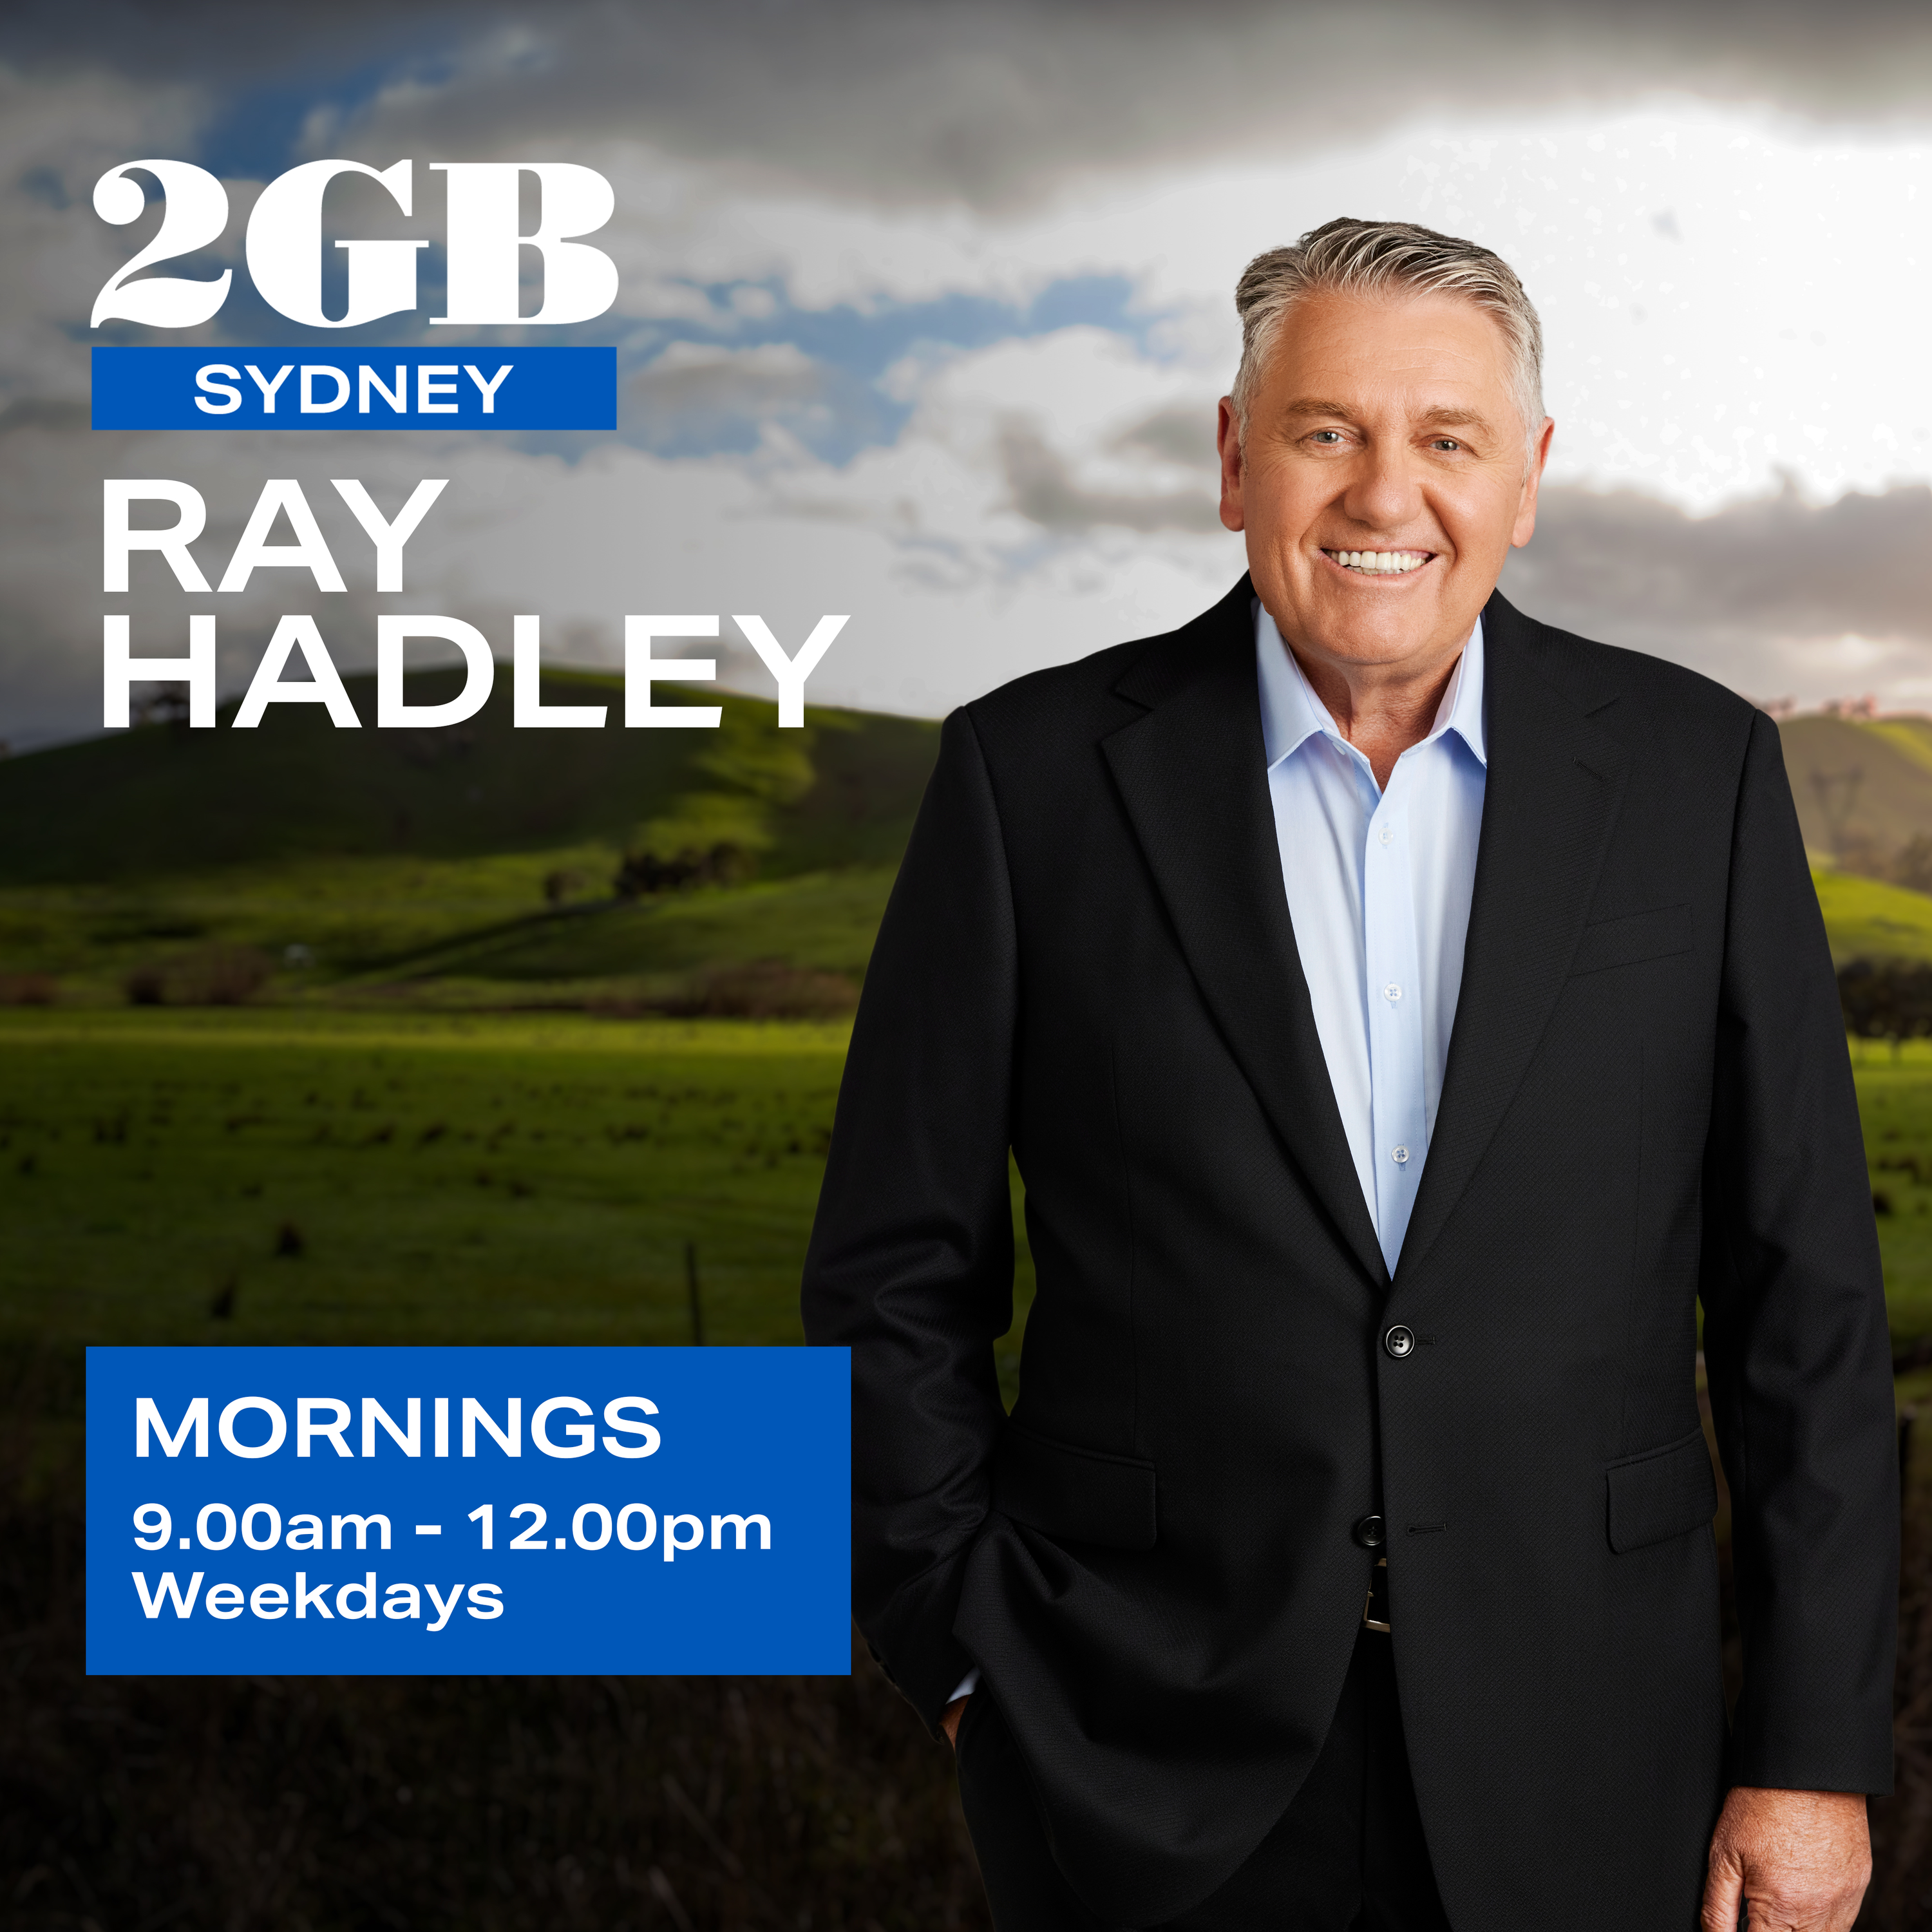 Ray Hadley: Candidate wasting everyone’s time